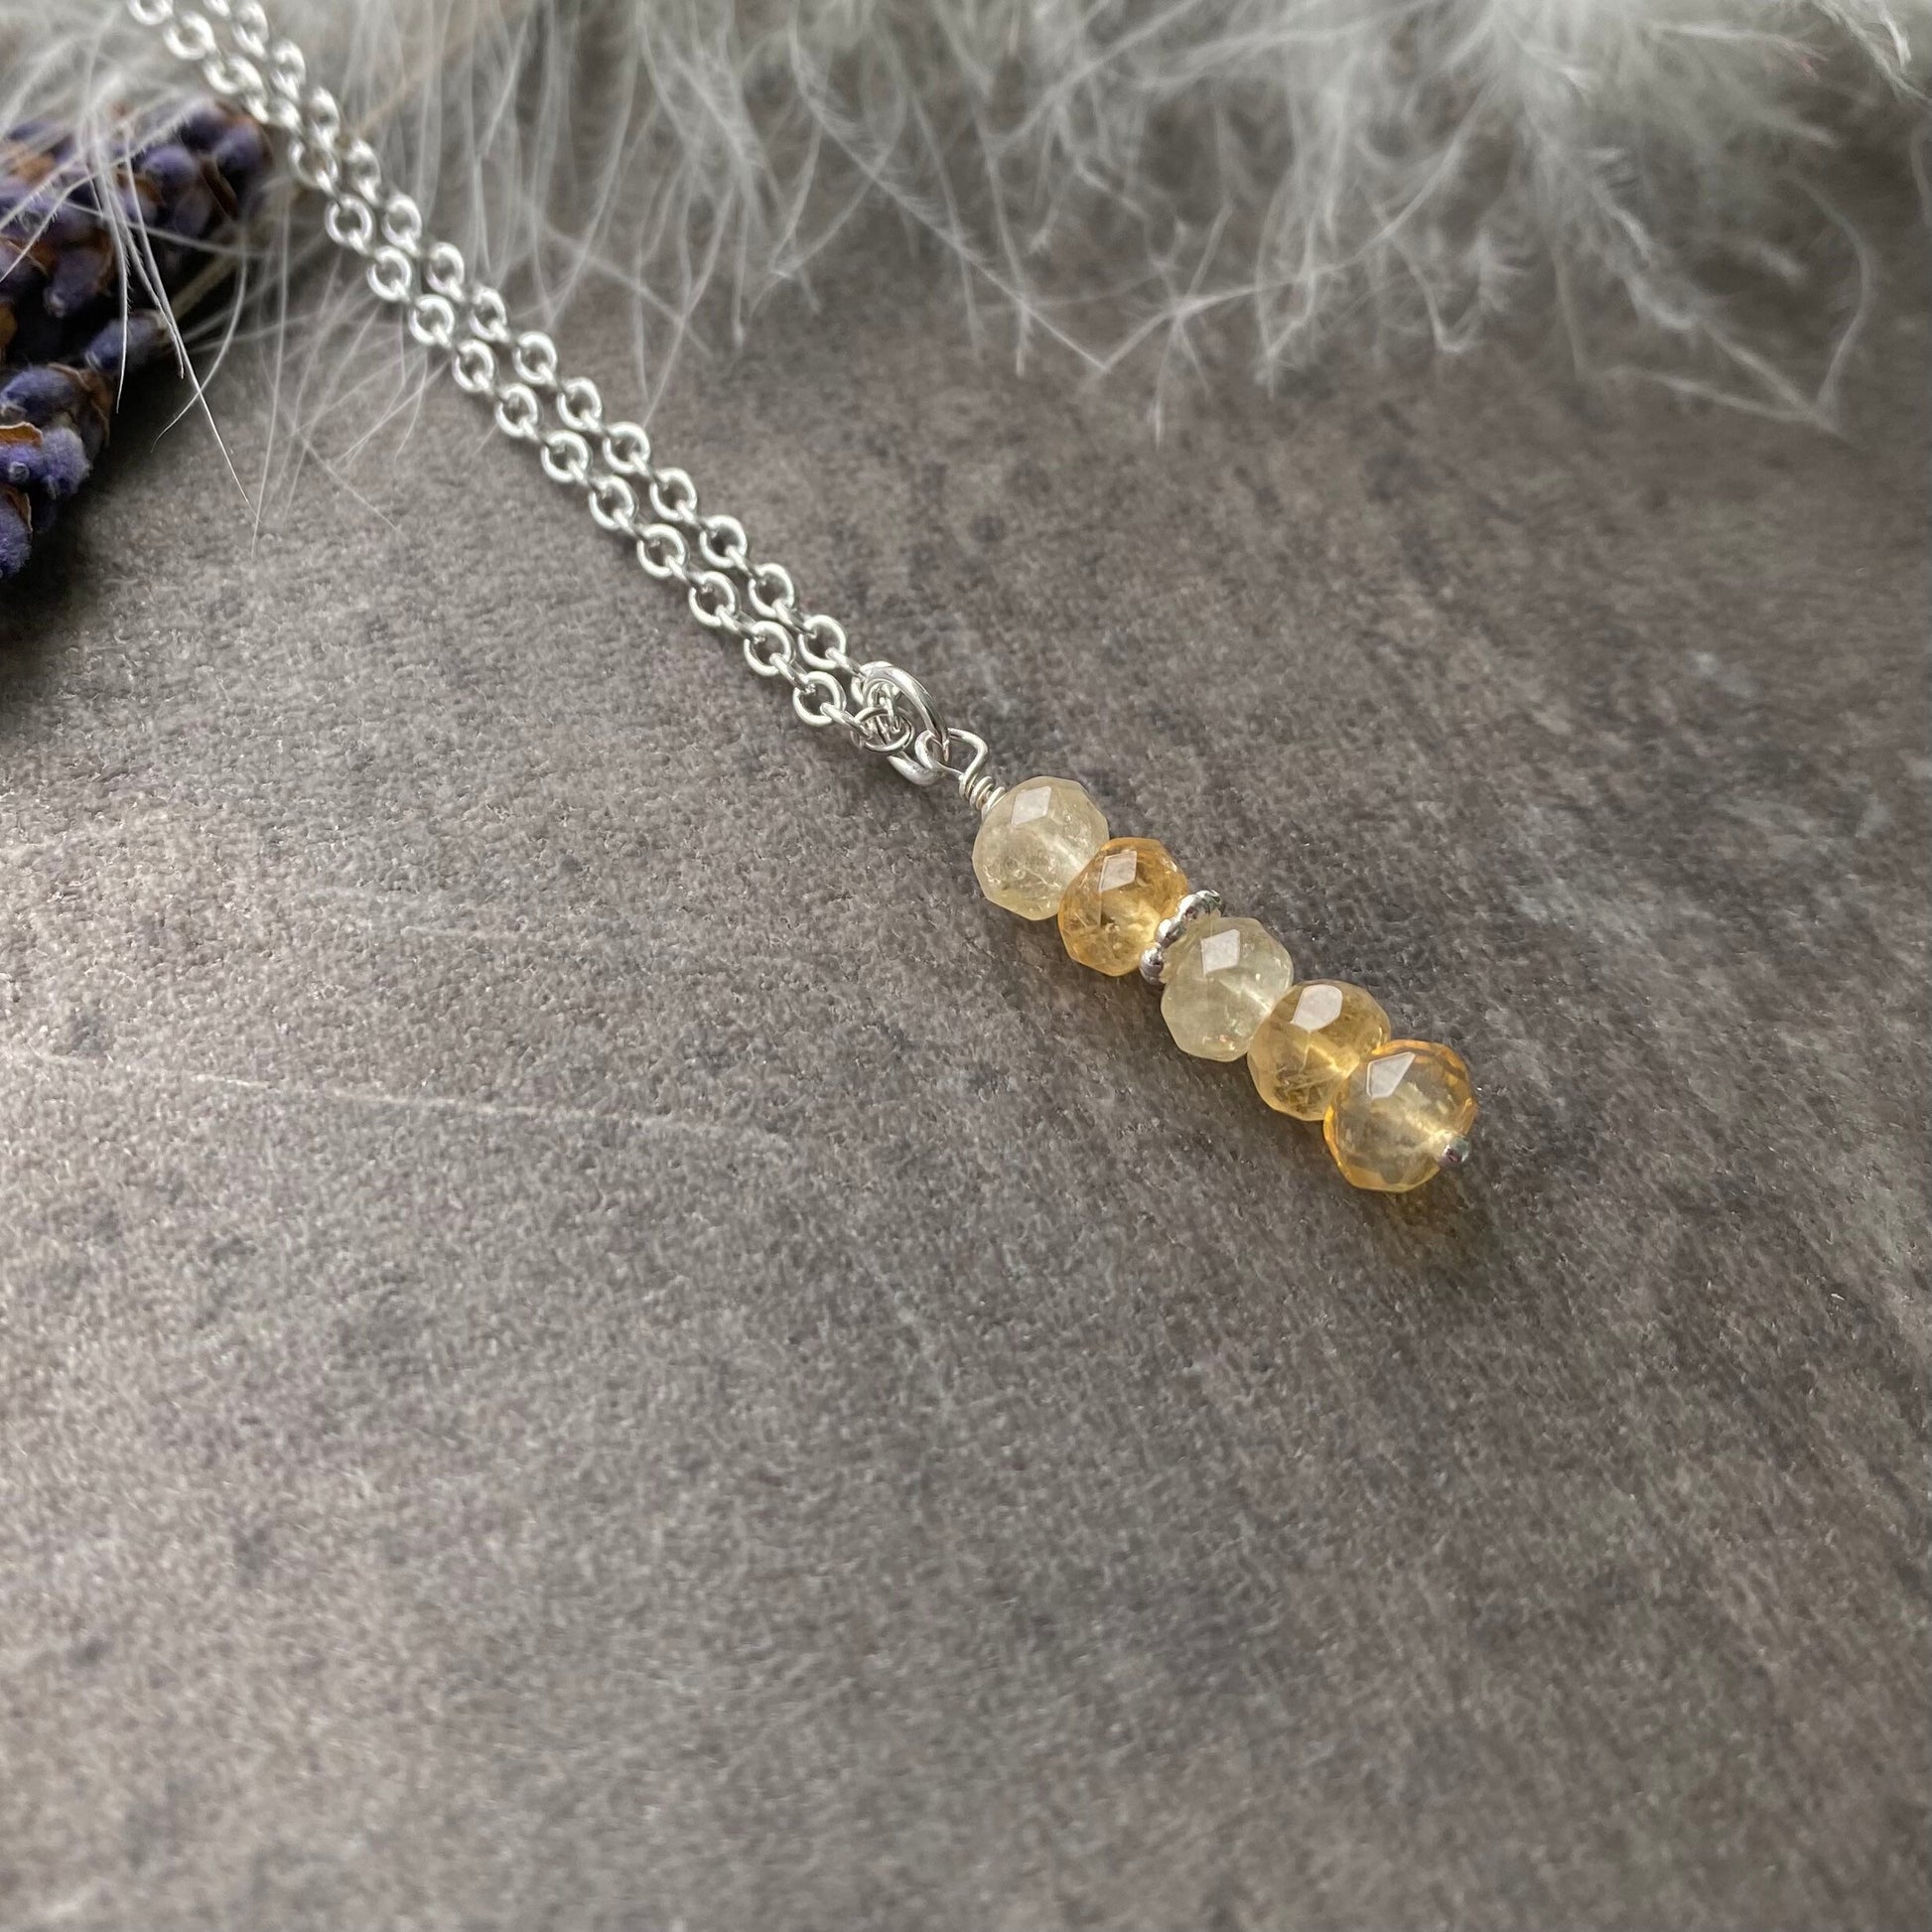 Dainty Citrine necklace, November birthstone, sterling silver faceted pendant gemstone necklace